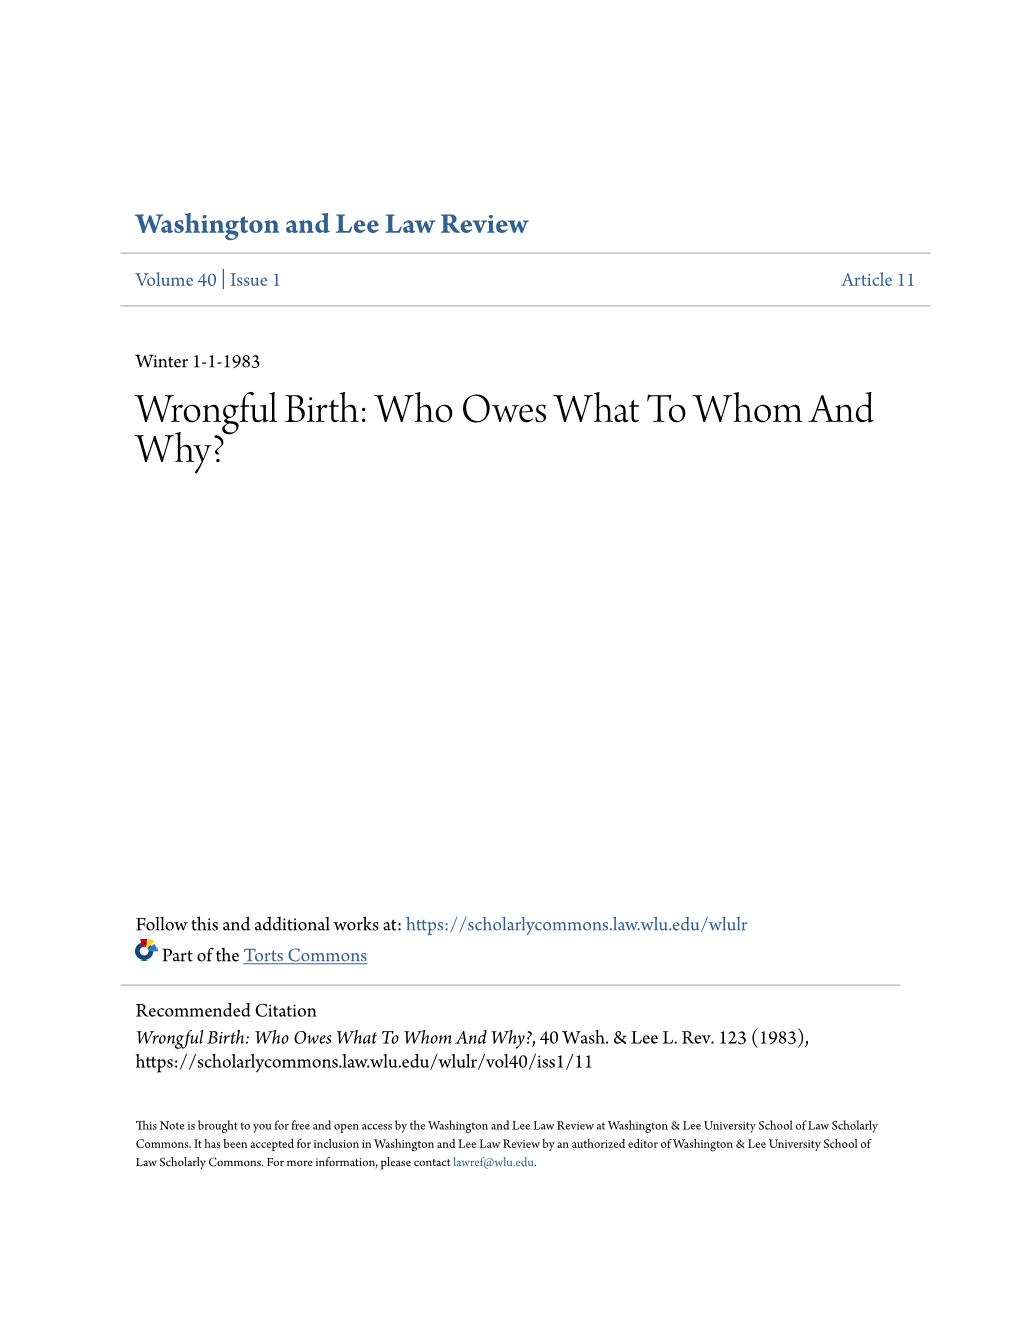 Wrongful Birth: Who Owes What to Whom and Why?